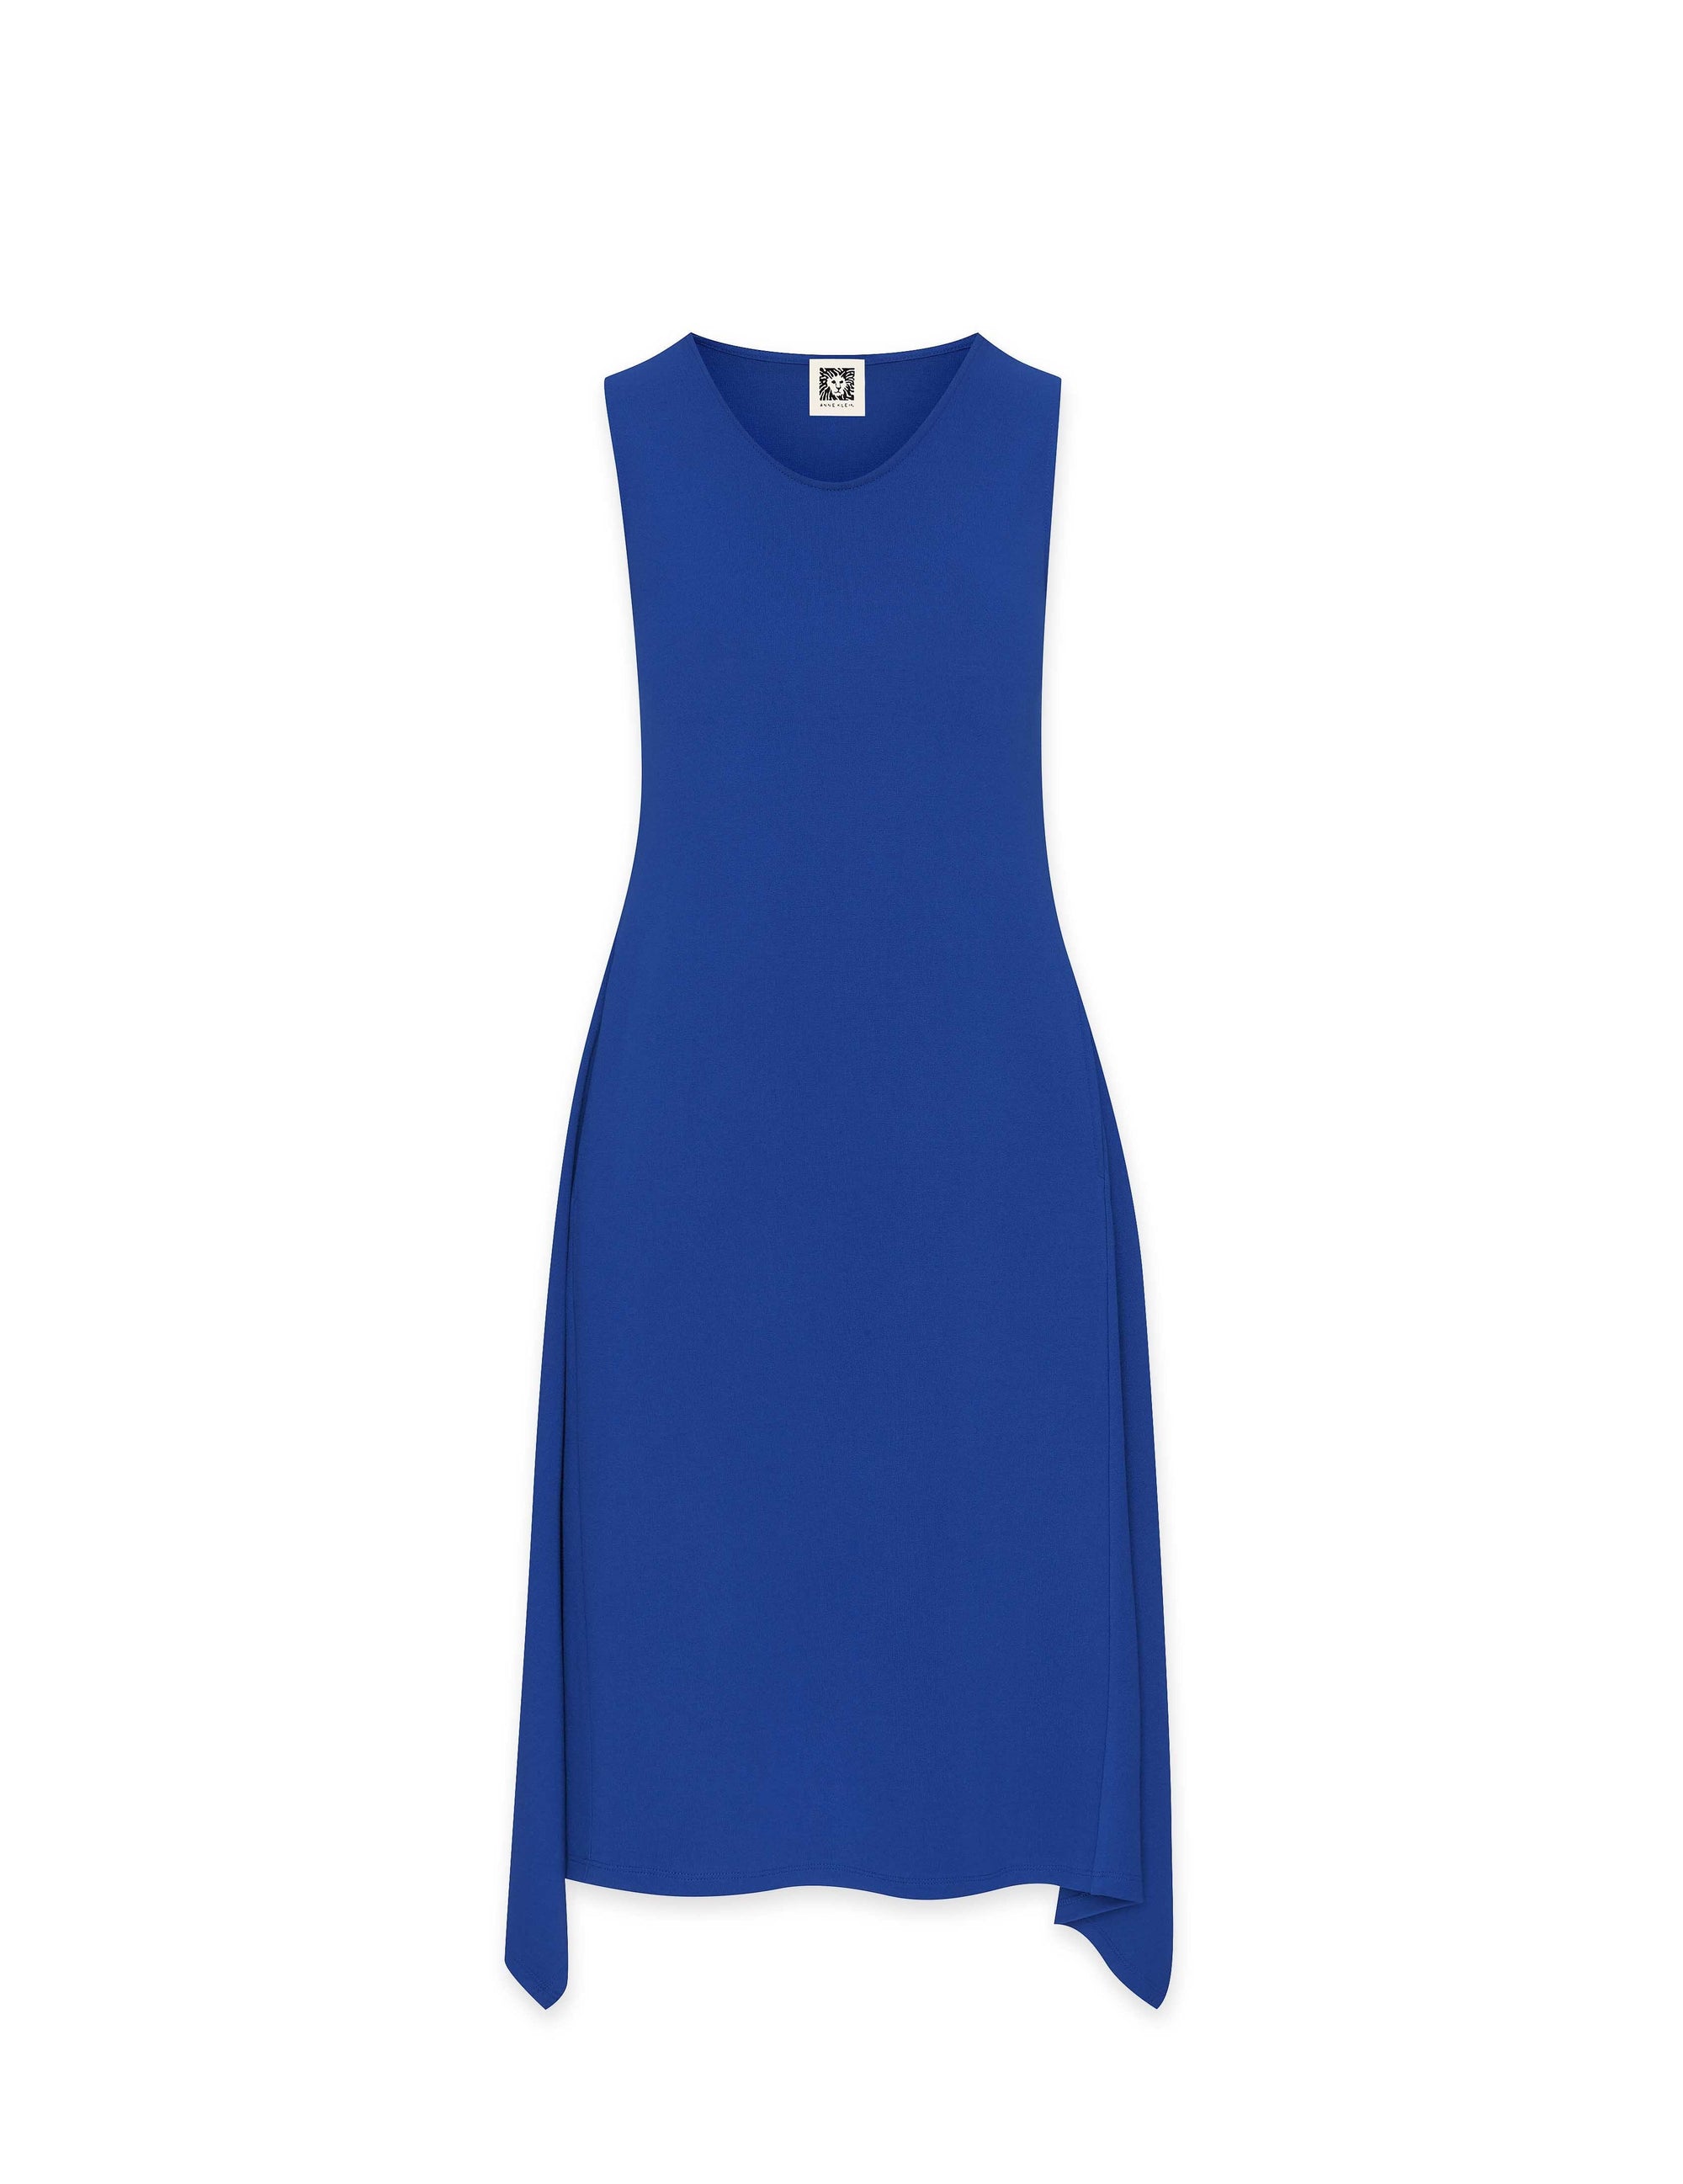 Anne Klein Magritte Blue Serenity Knit Gusset Dress- Clearance